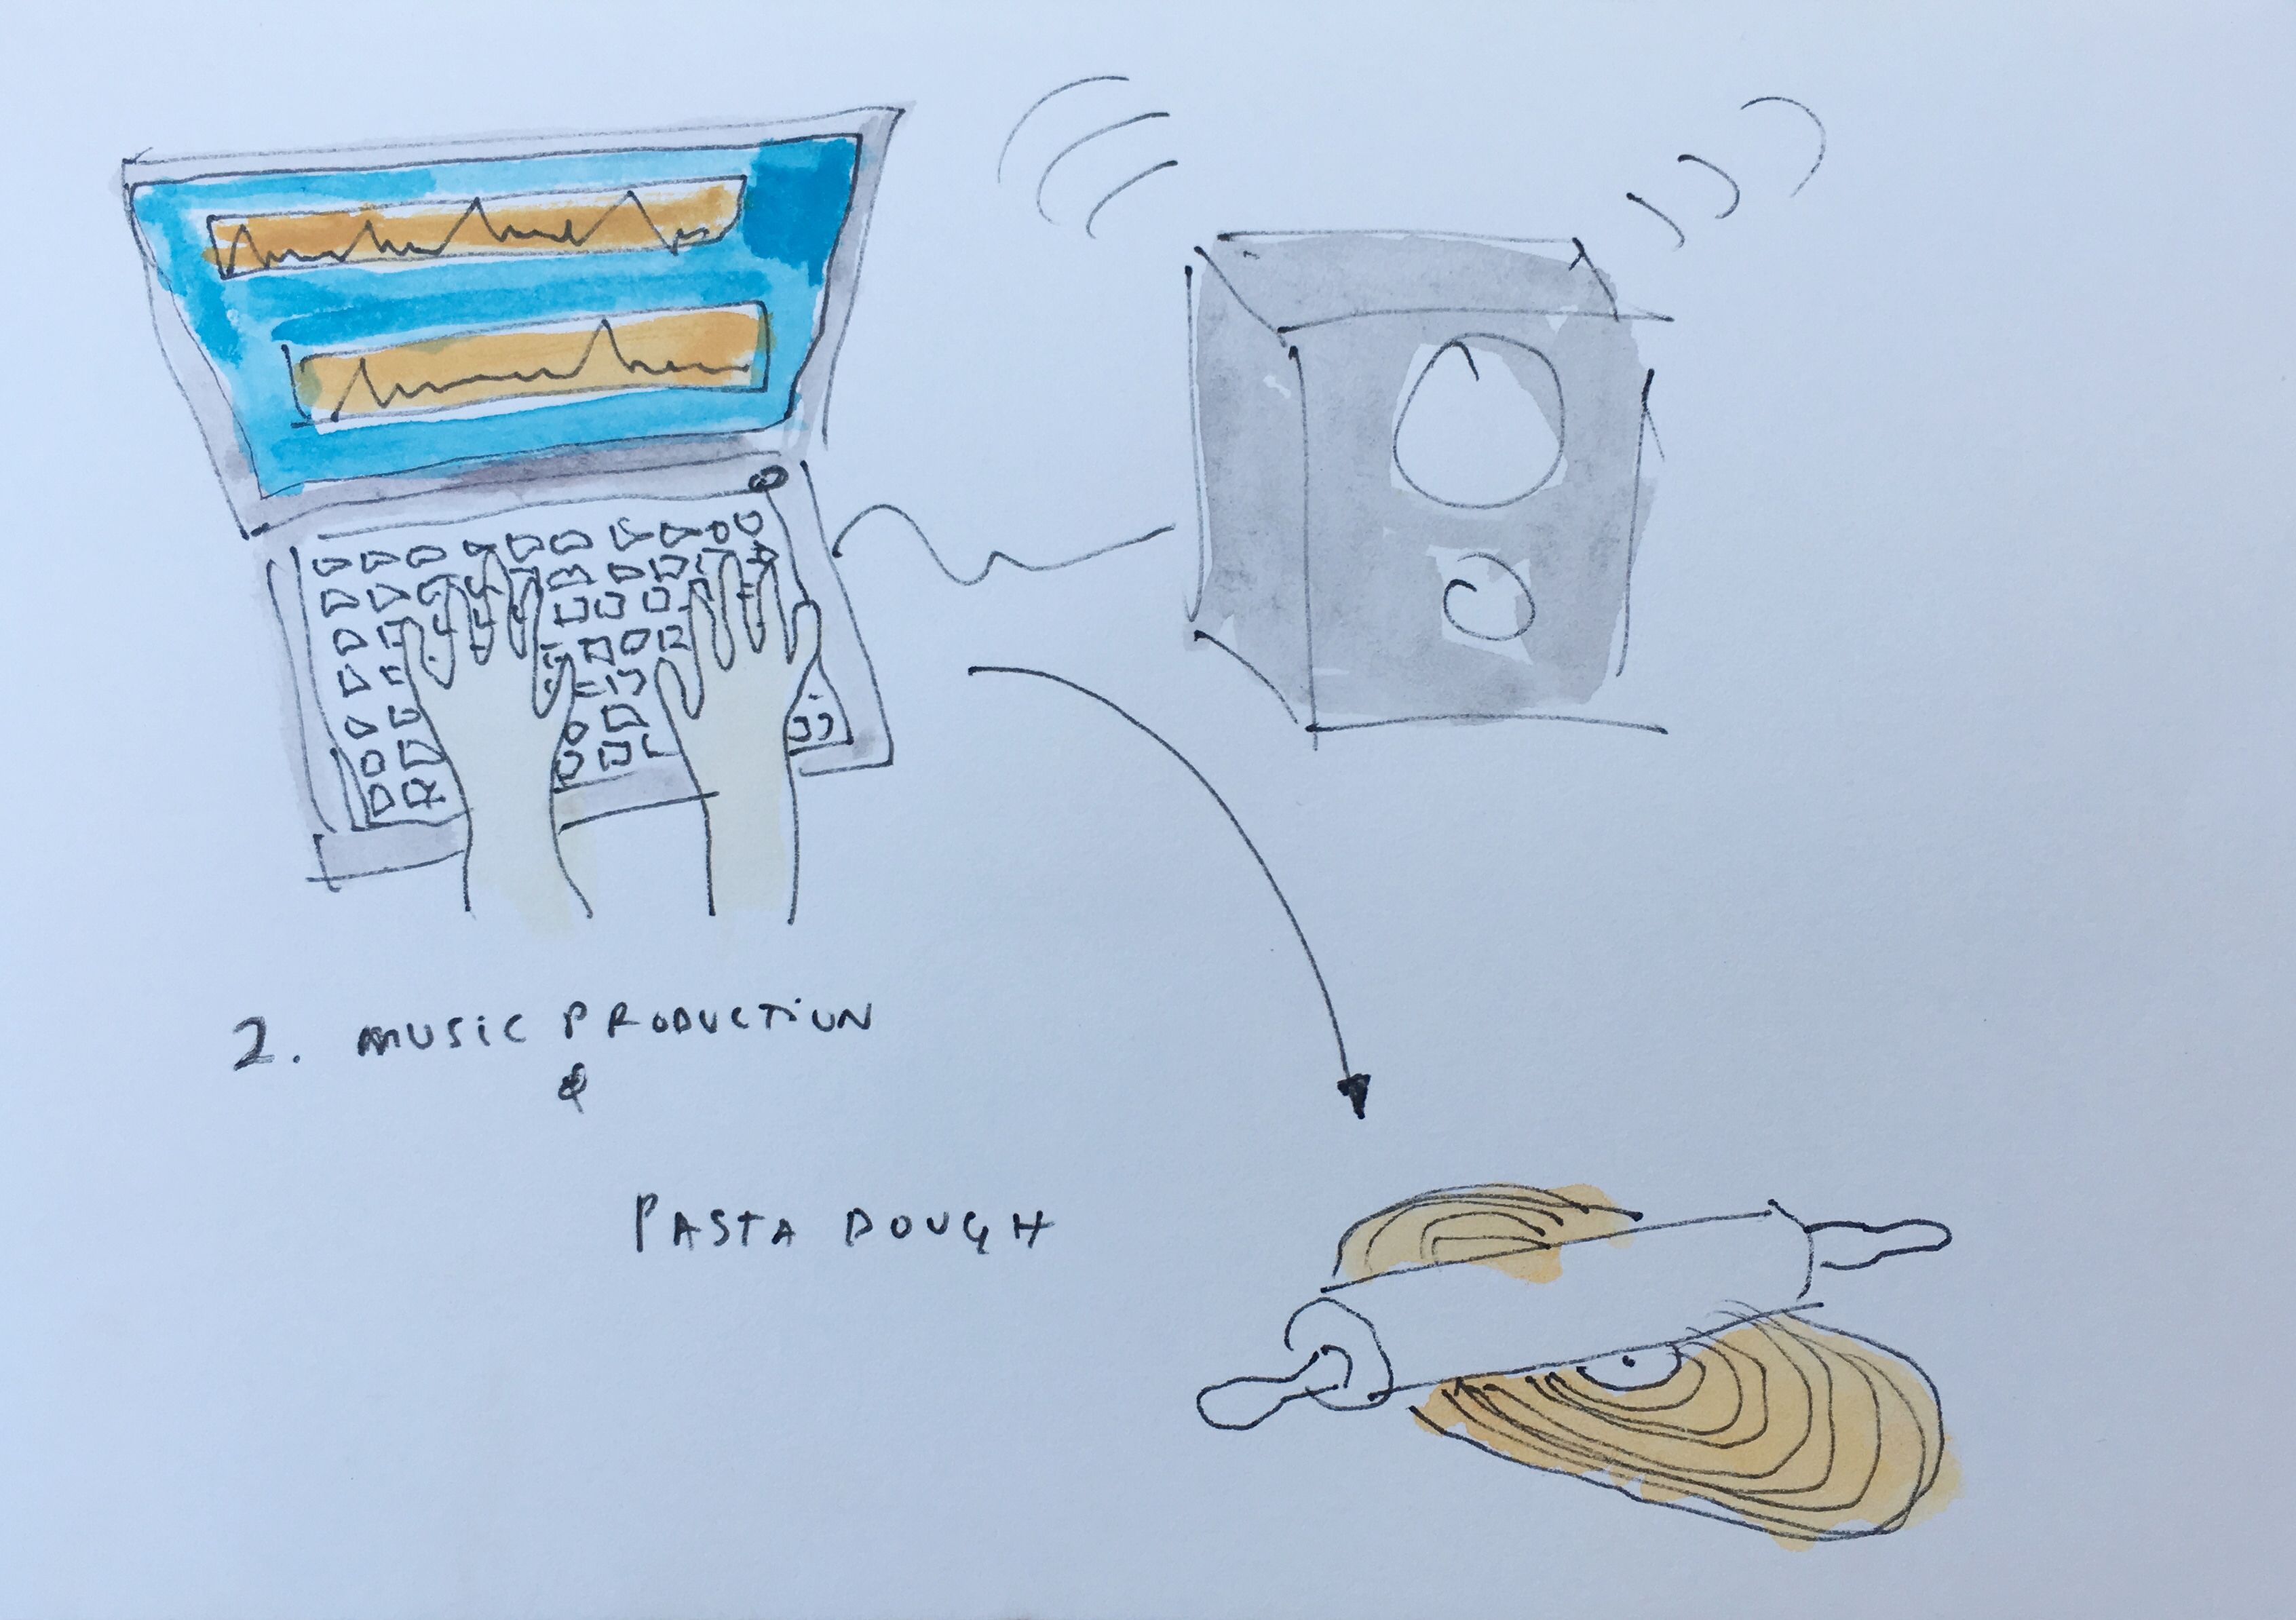 Concept color drawing of music production and pasta dough making for PPKK 05.00 by Sarah Ancelle Schoenfeld and Louis-Philippe Scoufaras